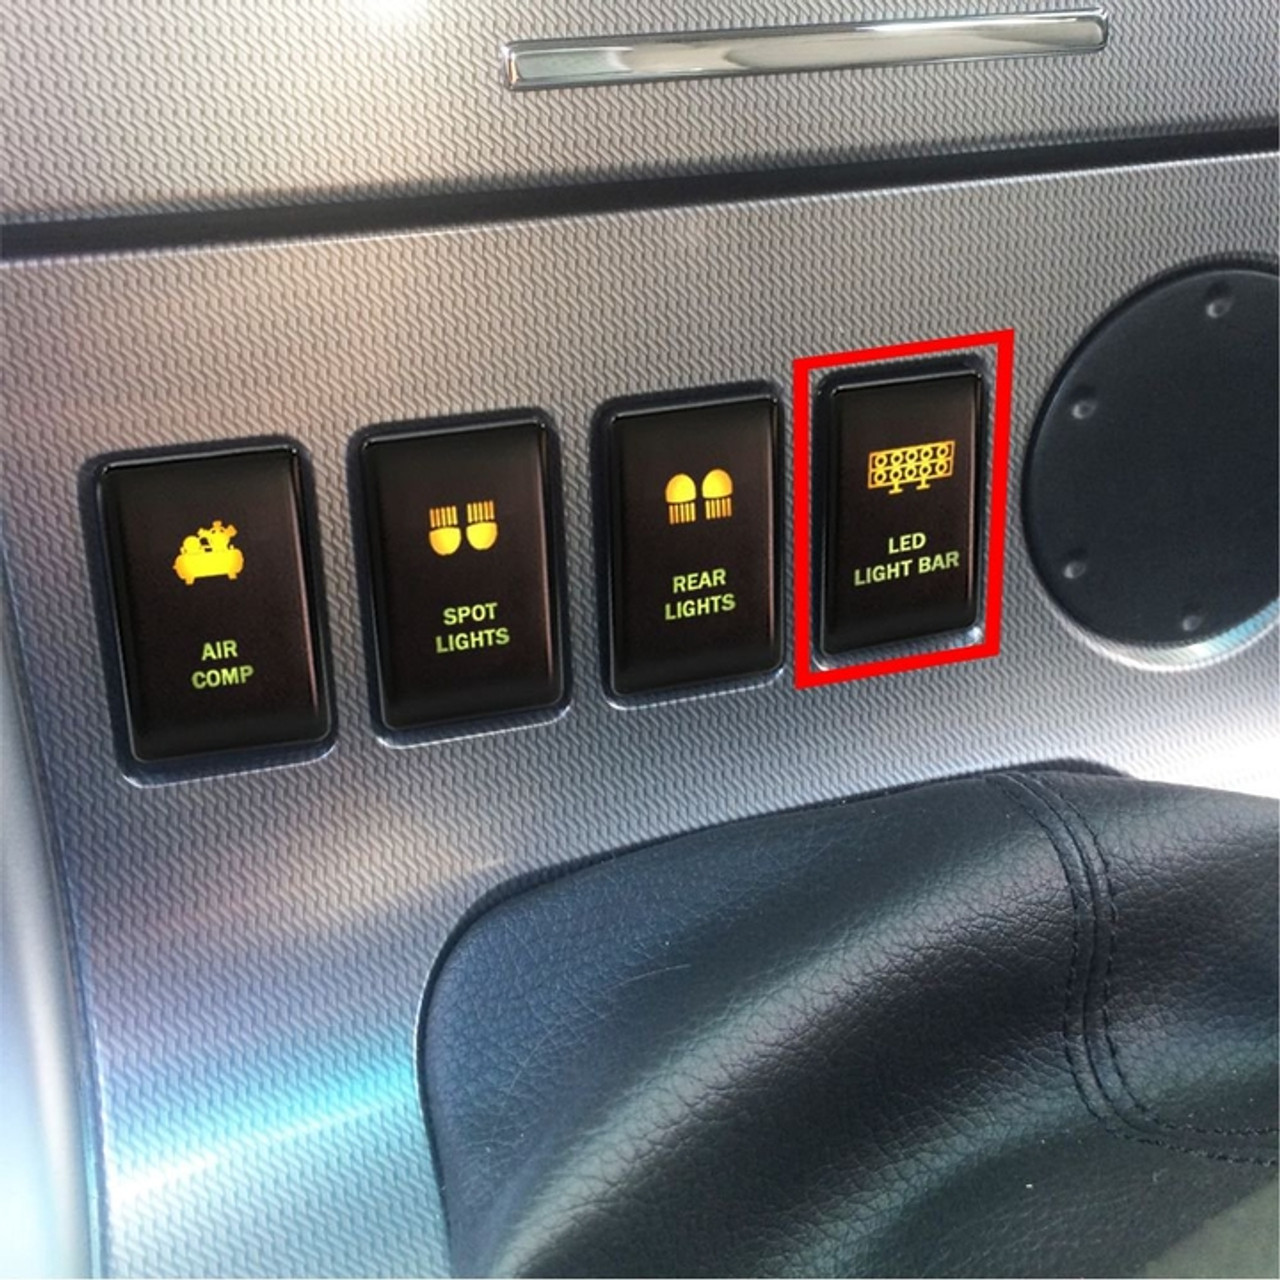 PUSH STYLE SWITCH TO SUIT NISSAN - LIGHT